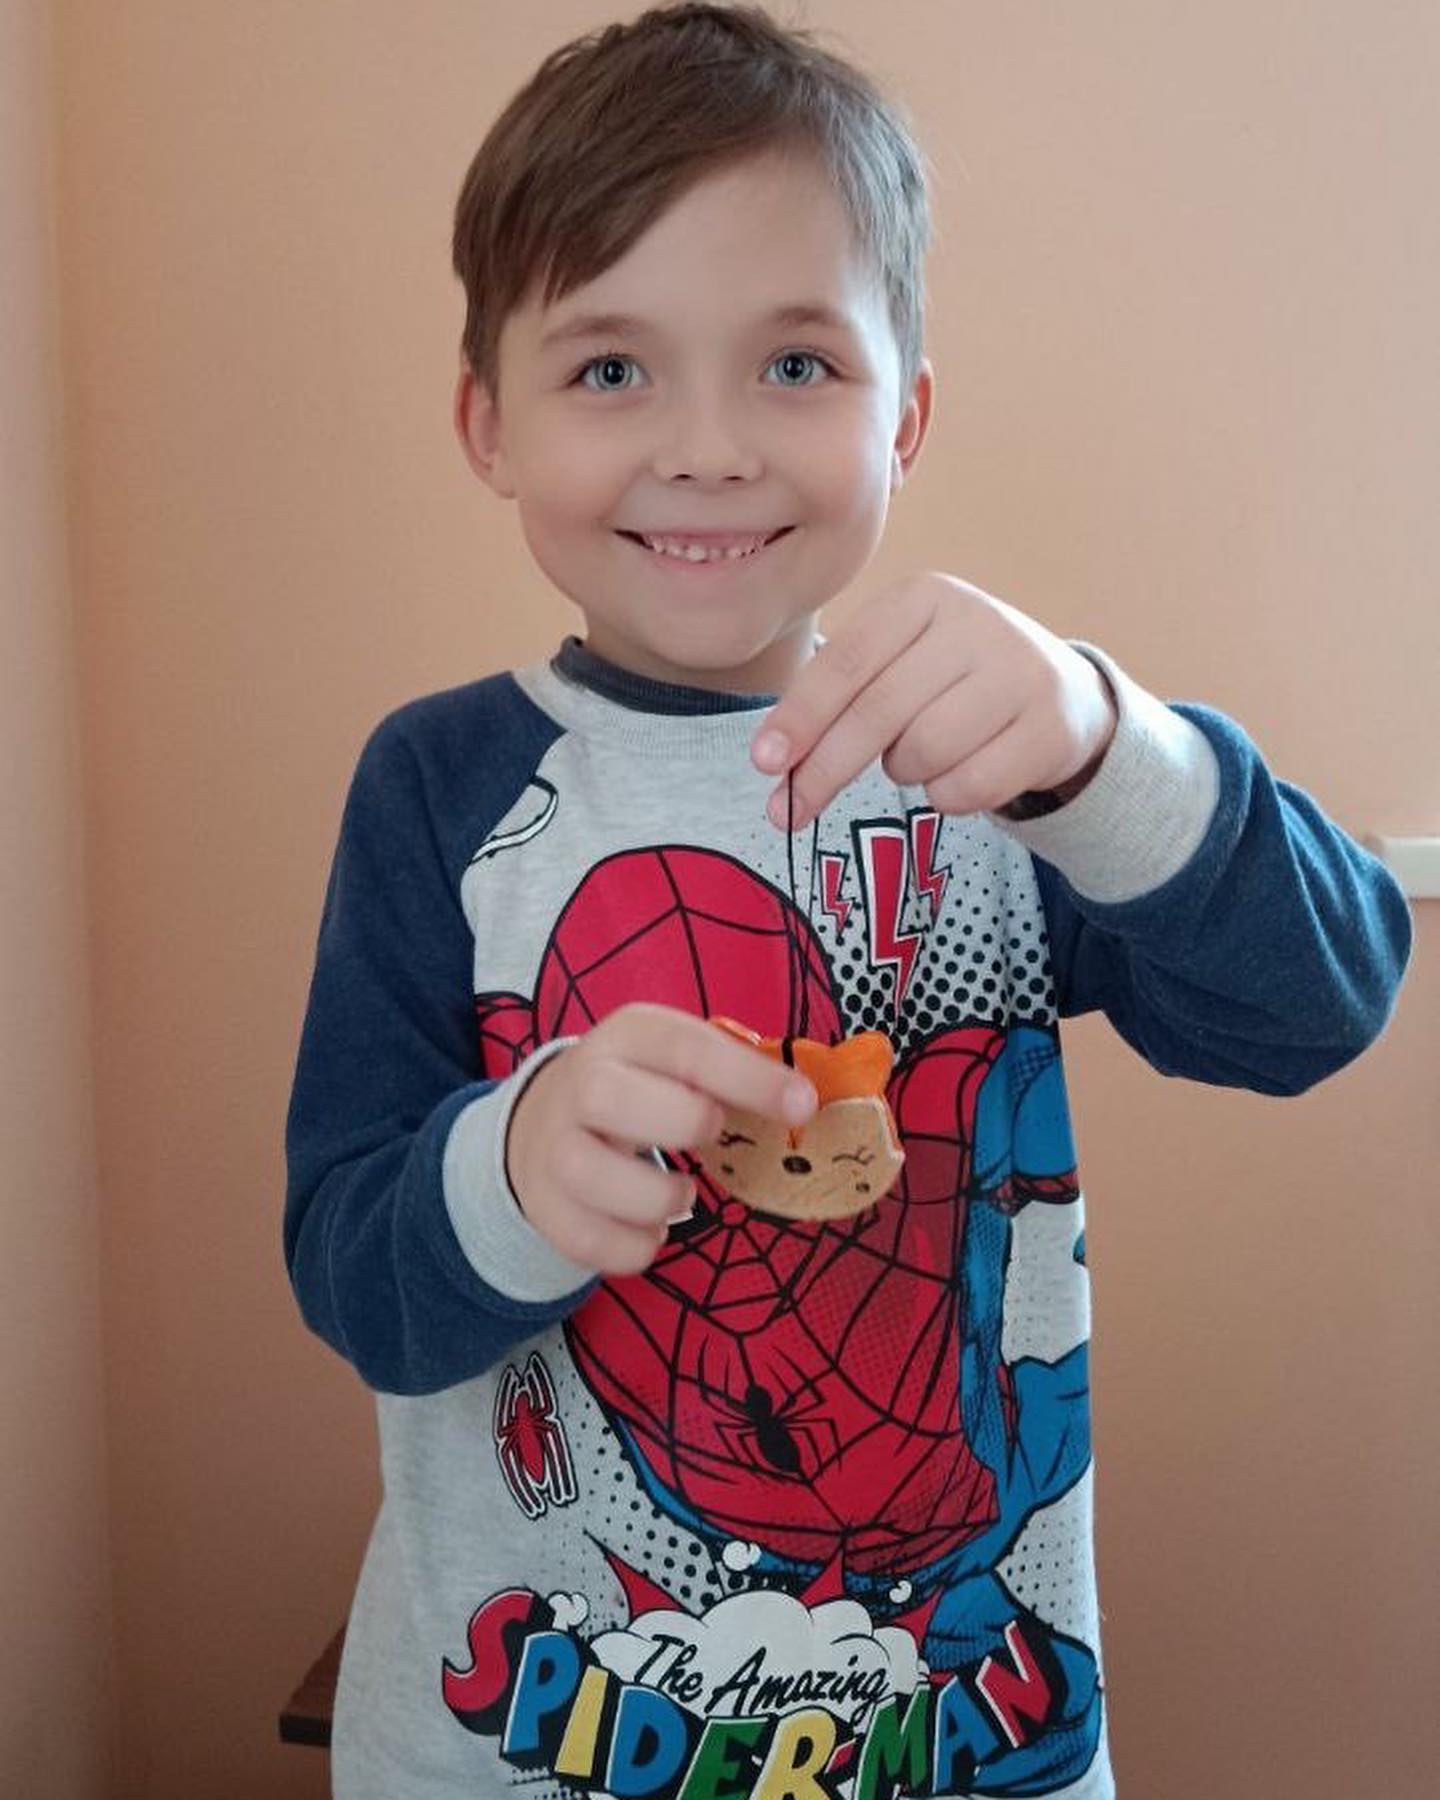 A young boy holding a spiderman cookie.